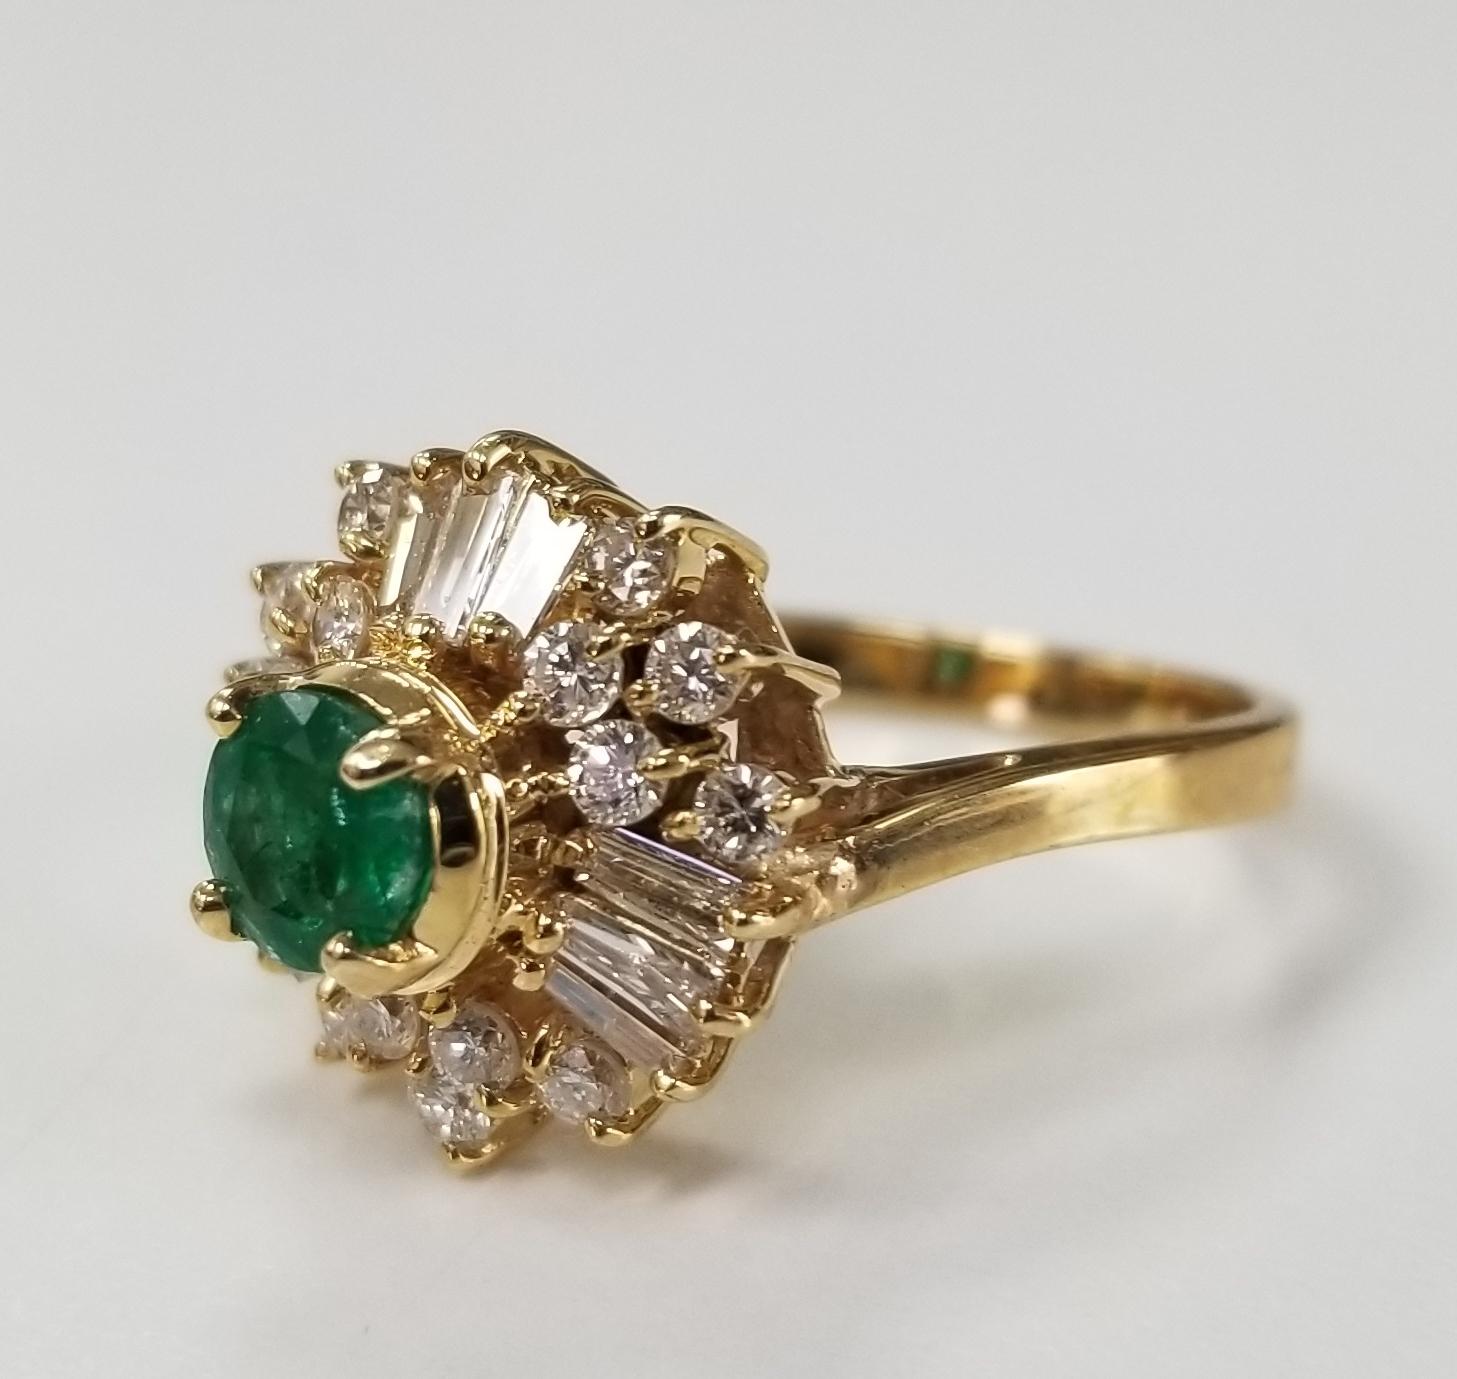 14k yellow gold emerald and diamond ring, containing 1 round  emerald weighing .60pts. and 15 round full cut and 9 baguette diamonds  weighing  of very fine quality weighing 1.00pts.  This ring is a size 7 but we will size to fit for free.